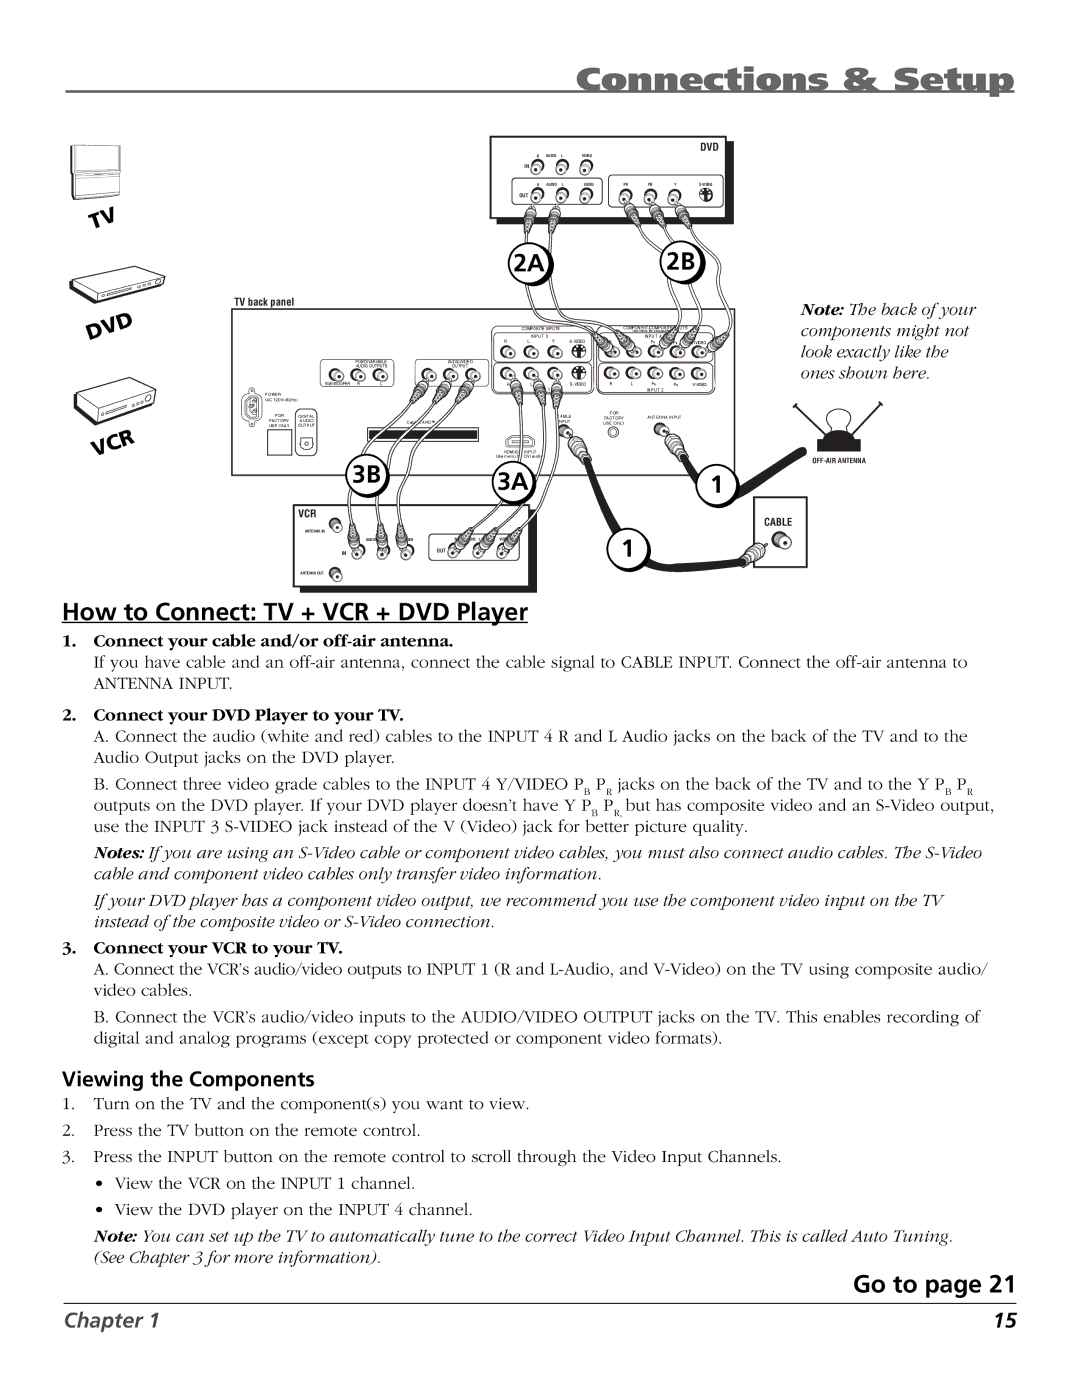 RCA HDTV manual 2A 2B, 3A1, How to Connect TV + VCR + DVD Player, Go to, Viewing the Components 